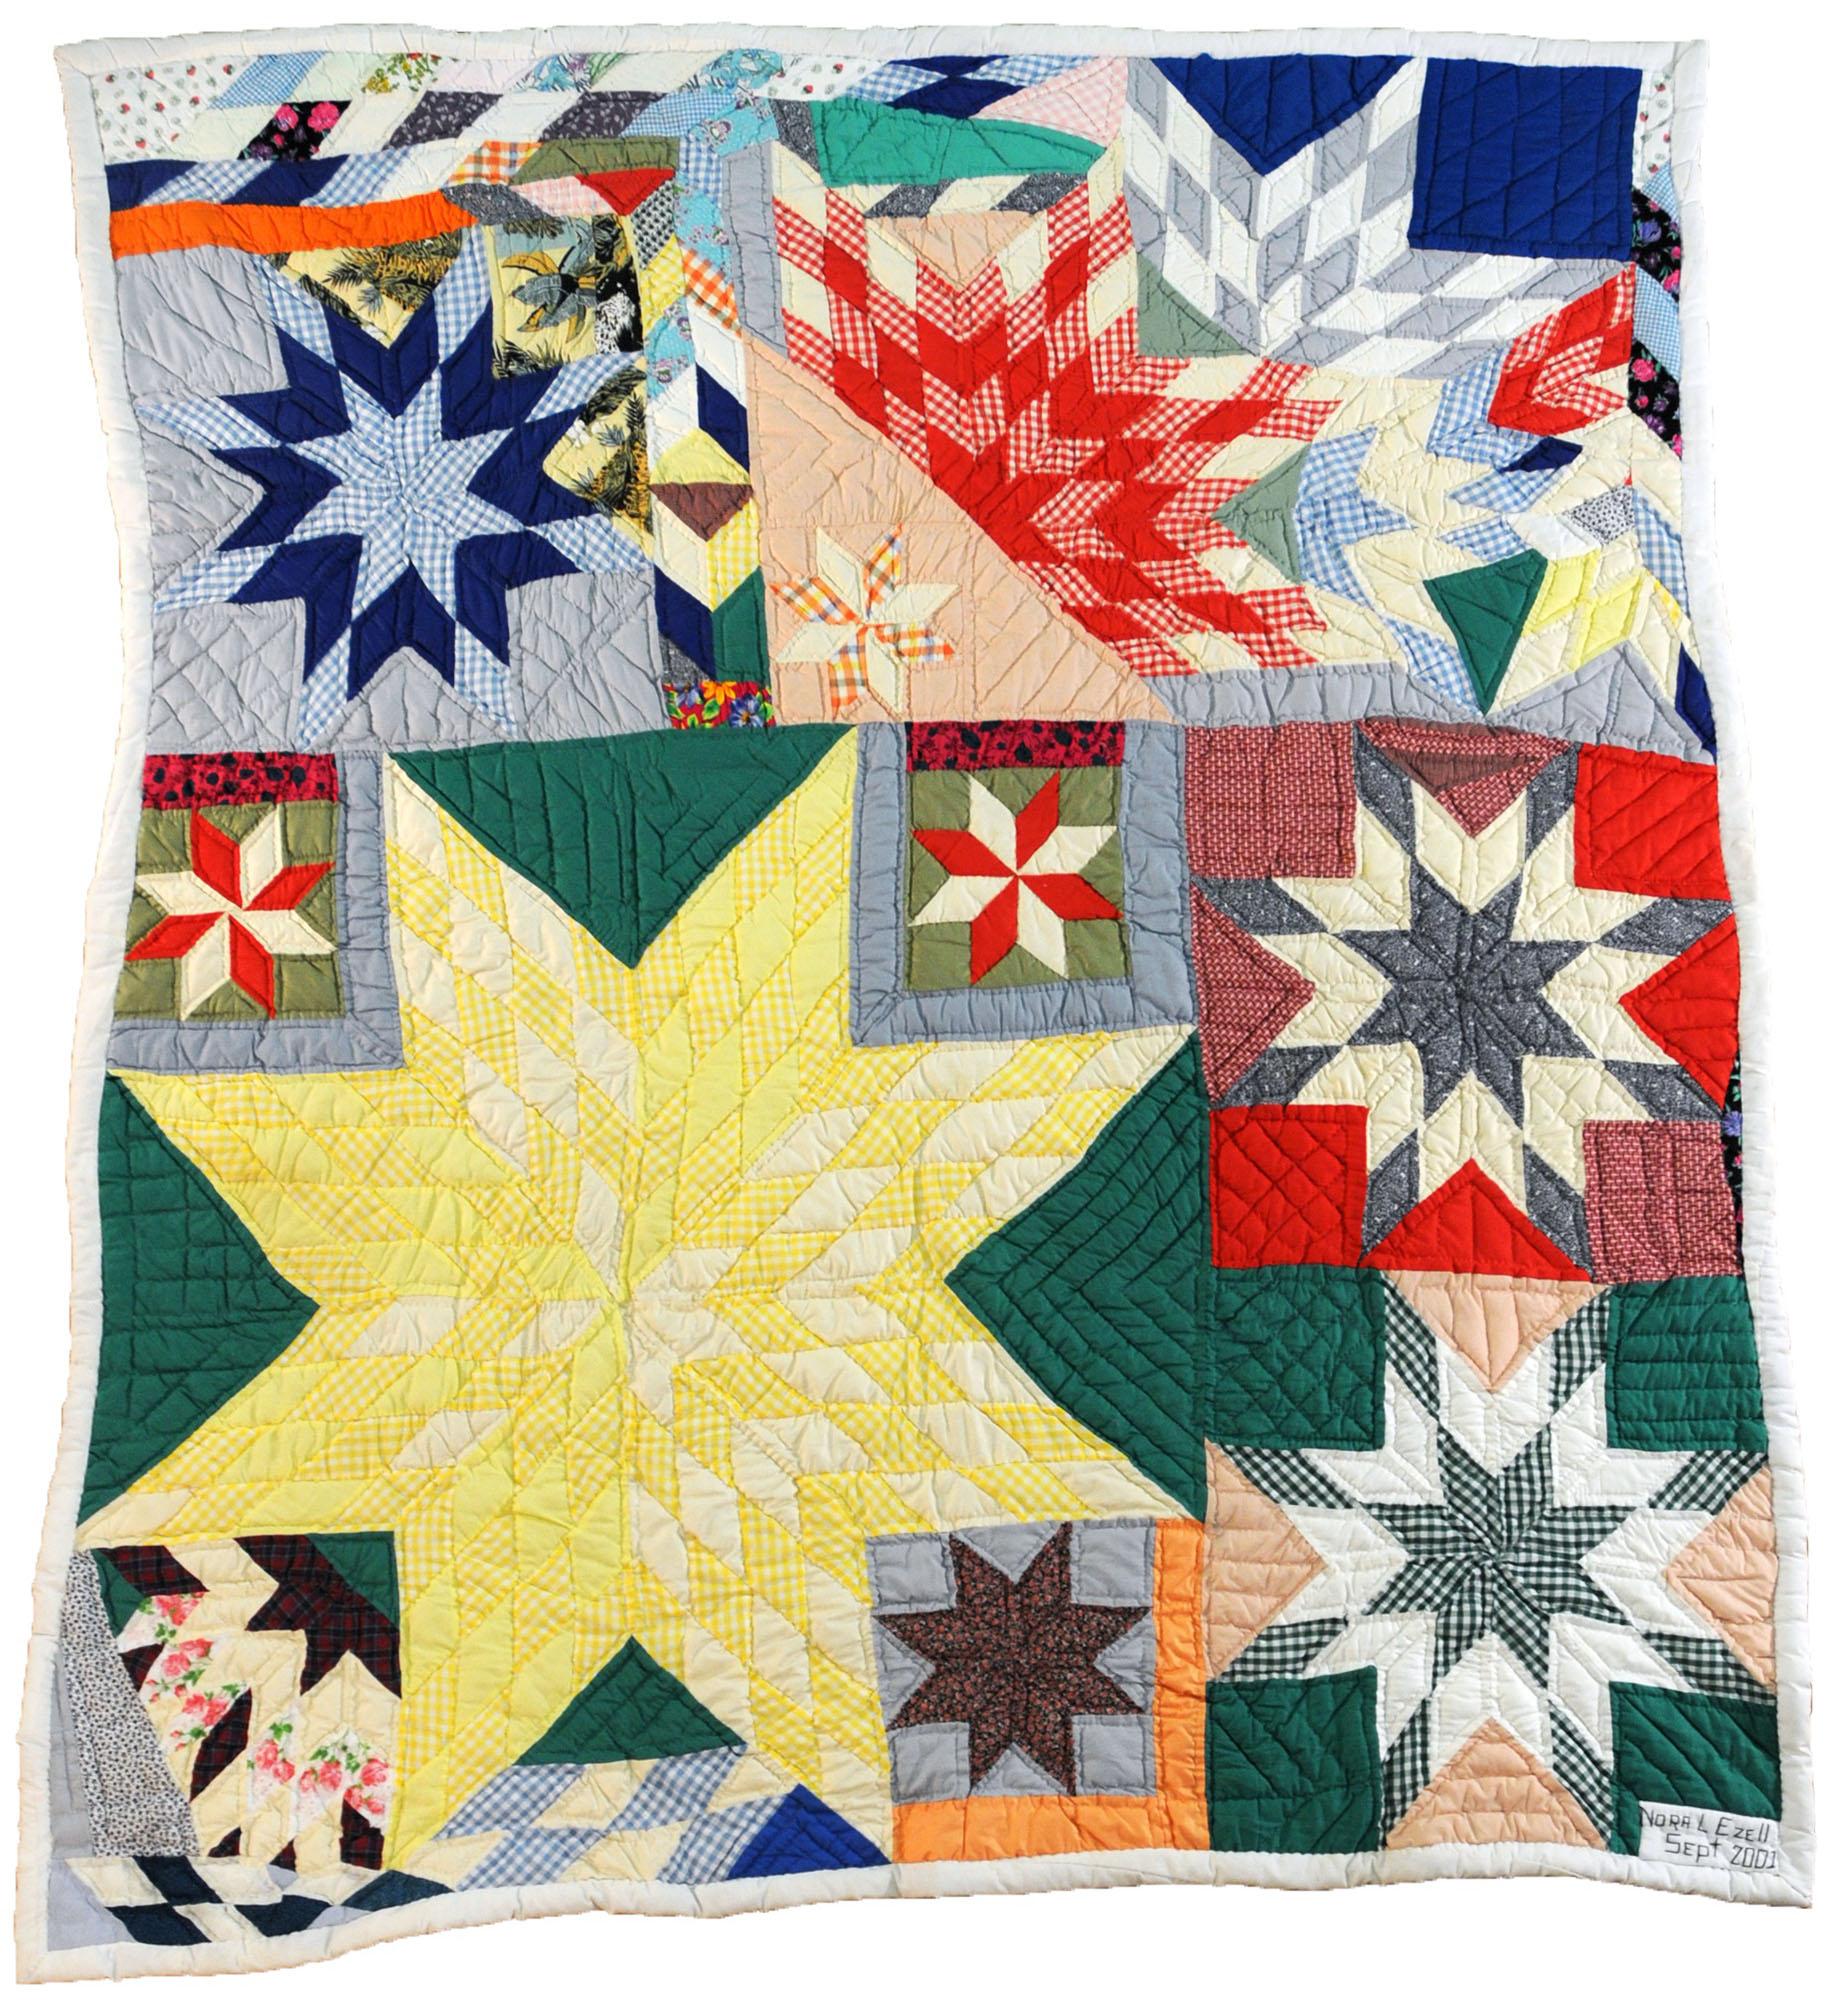 Nora Ezell, Star Puzzle, 2001. Cotton, polyester. Courtesy of the Montgomery Museum of Fine Arts.